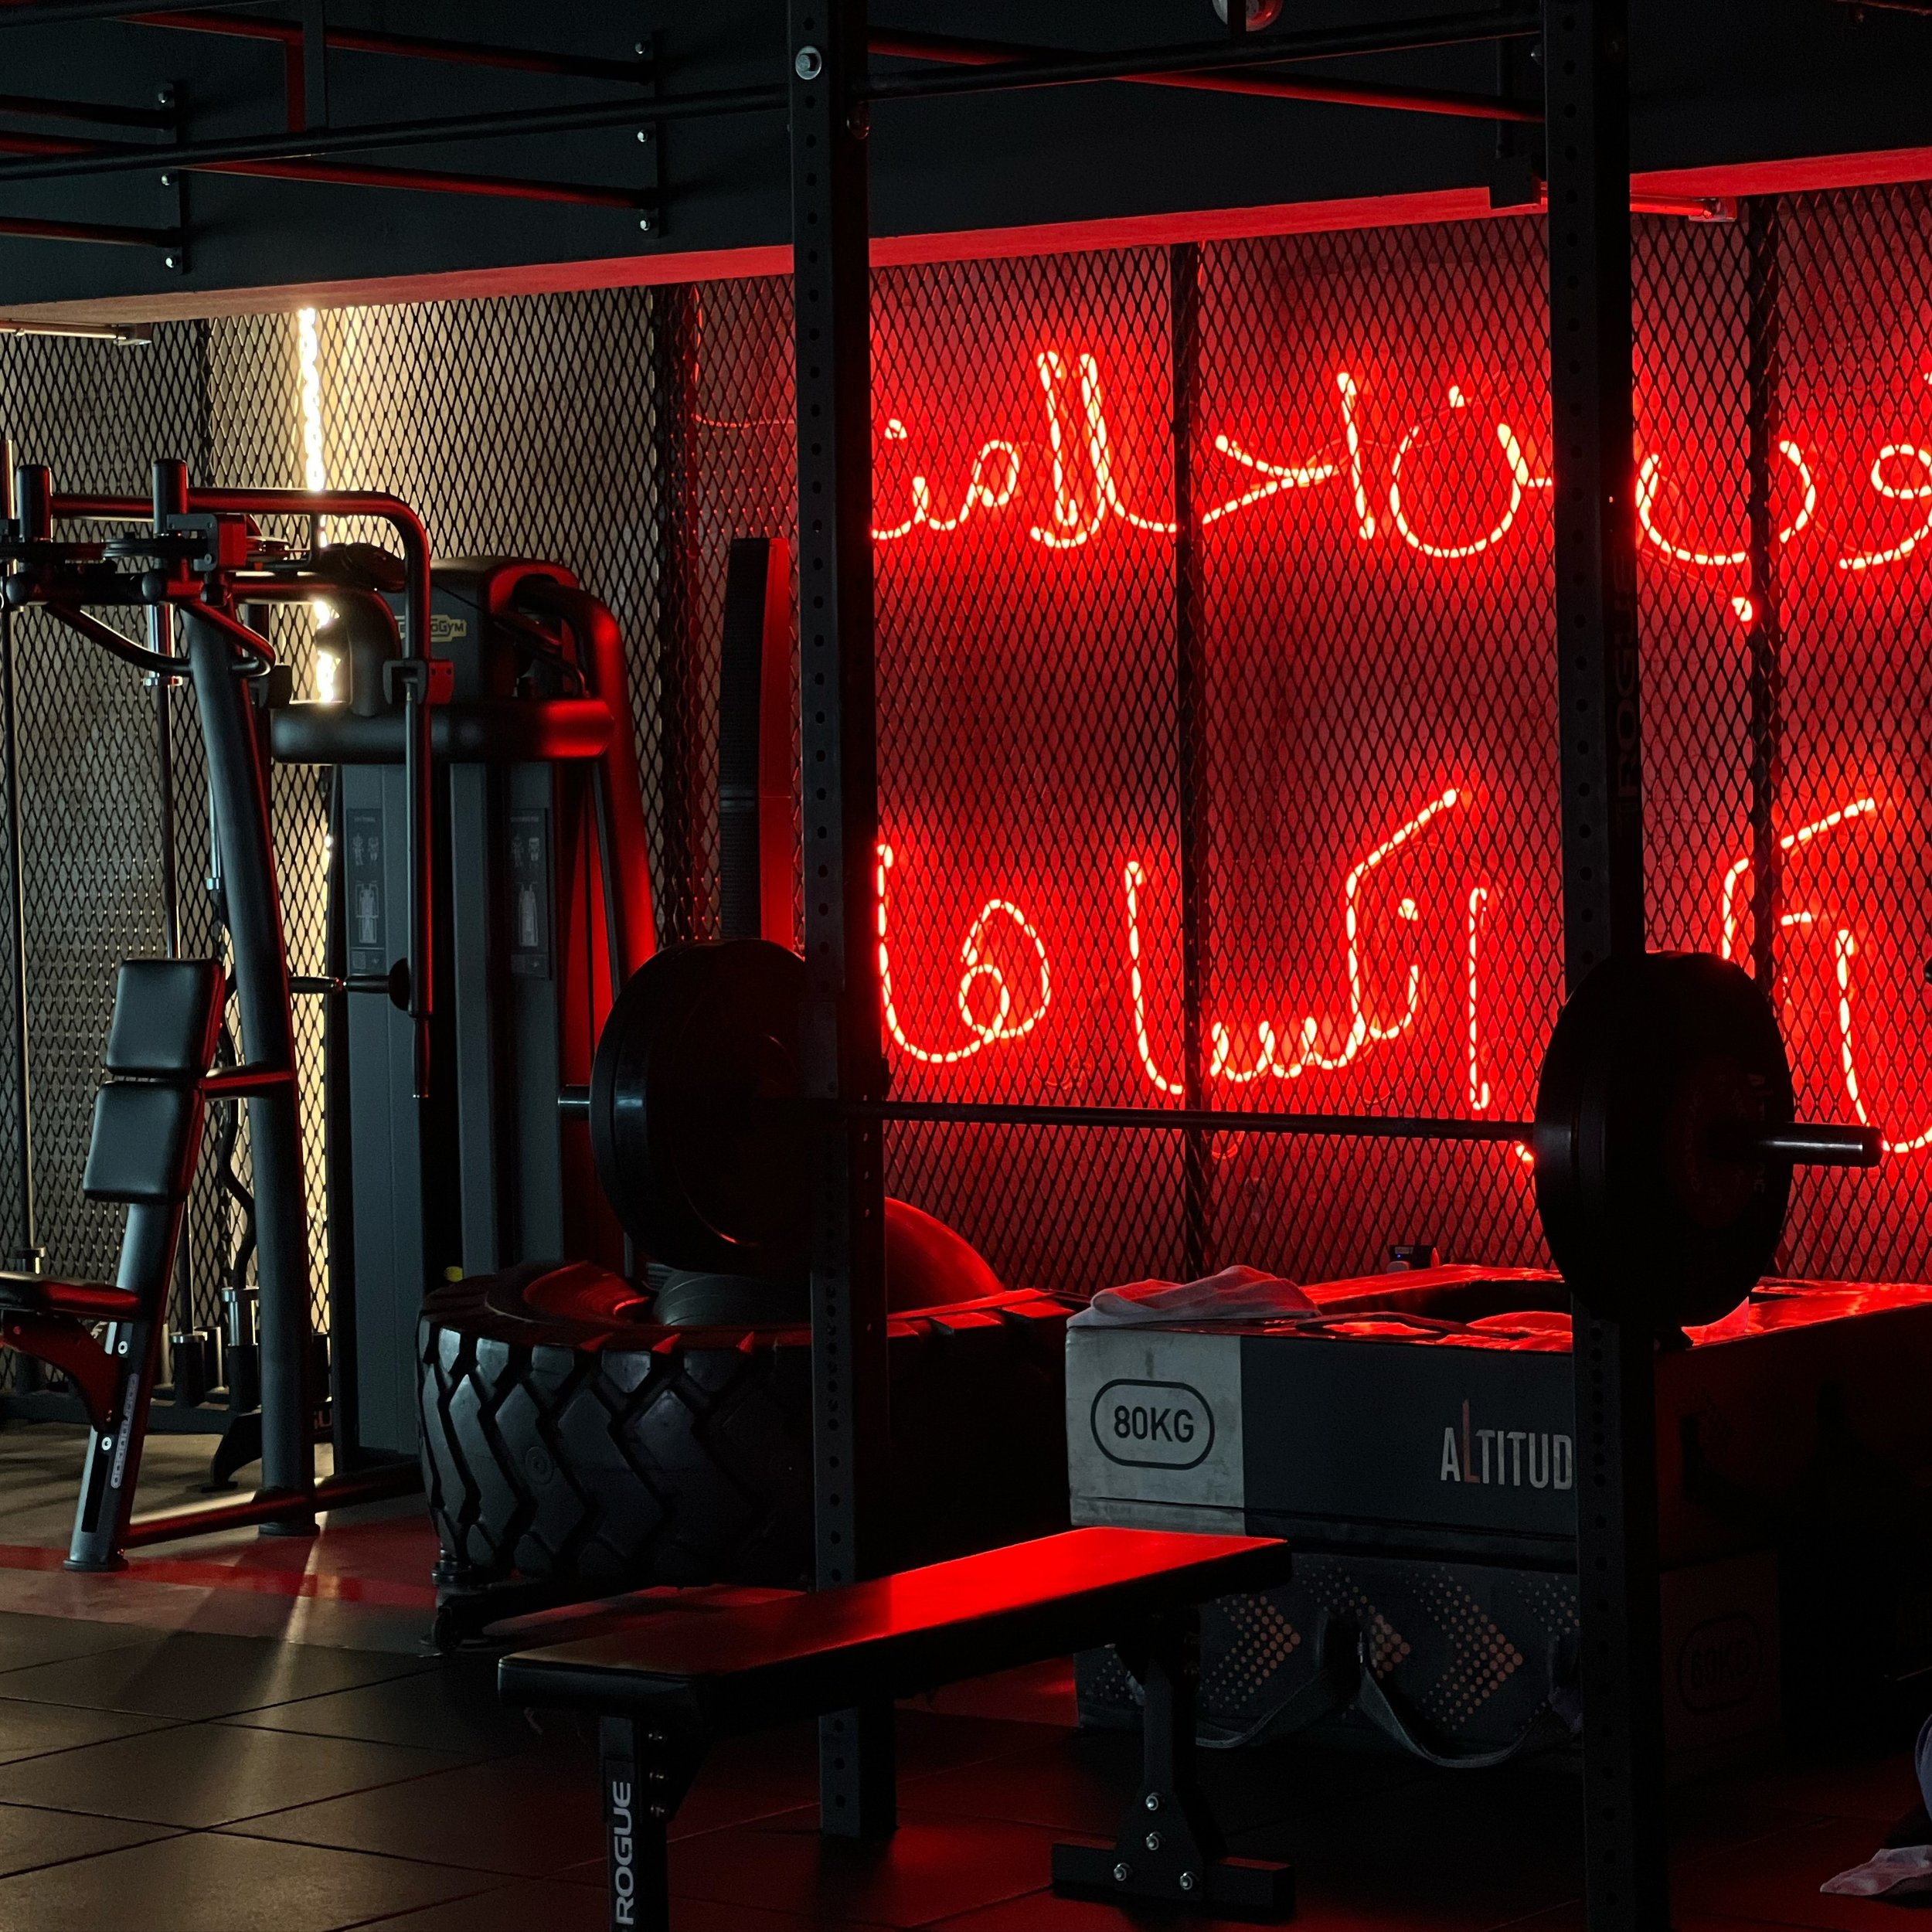 Our playground brims with strength, power, and perseverance. Book your sessions to conquer both physical and mental challenges 💥💪🏽

#altitude #altitudeelite #fitness #doha #train #doha #qatar #gymlife #celebrations #gym #fitness #motivation #fitne